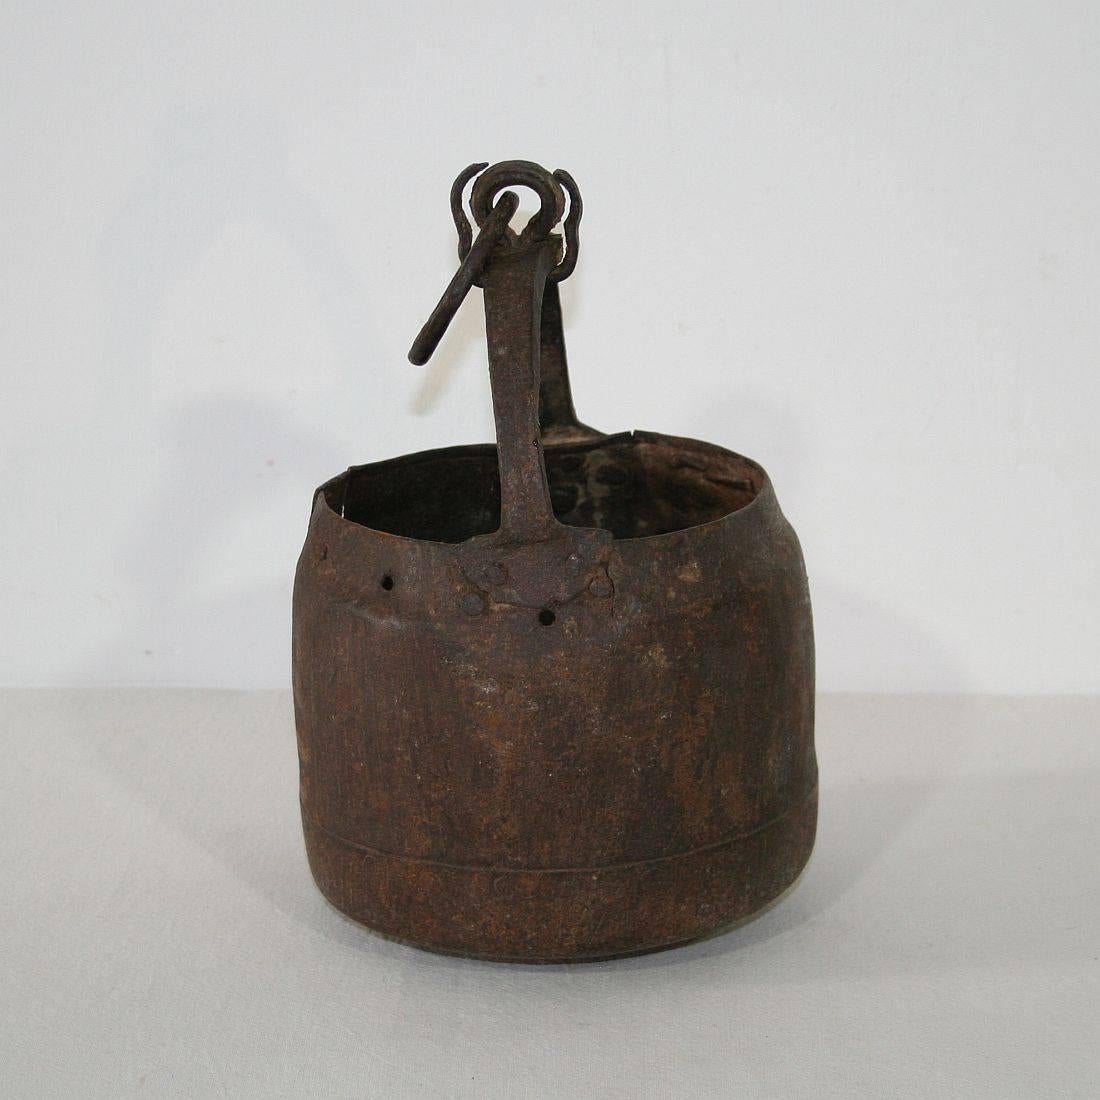 Folk Art Primitive 18th Century Hand-Forged Iron Cooking Pot